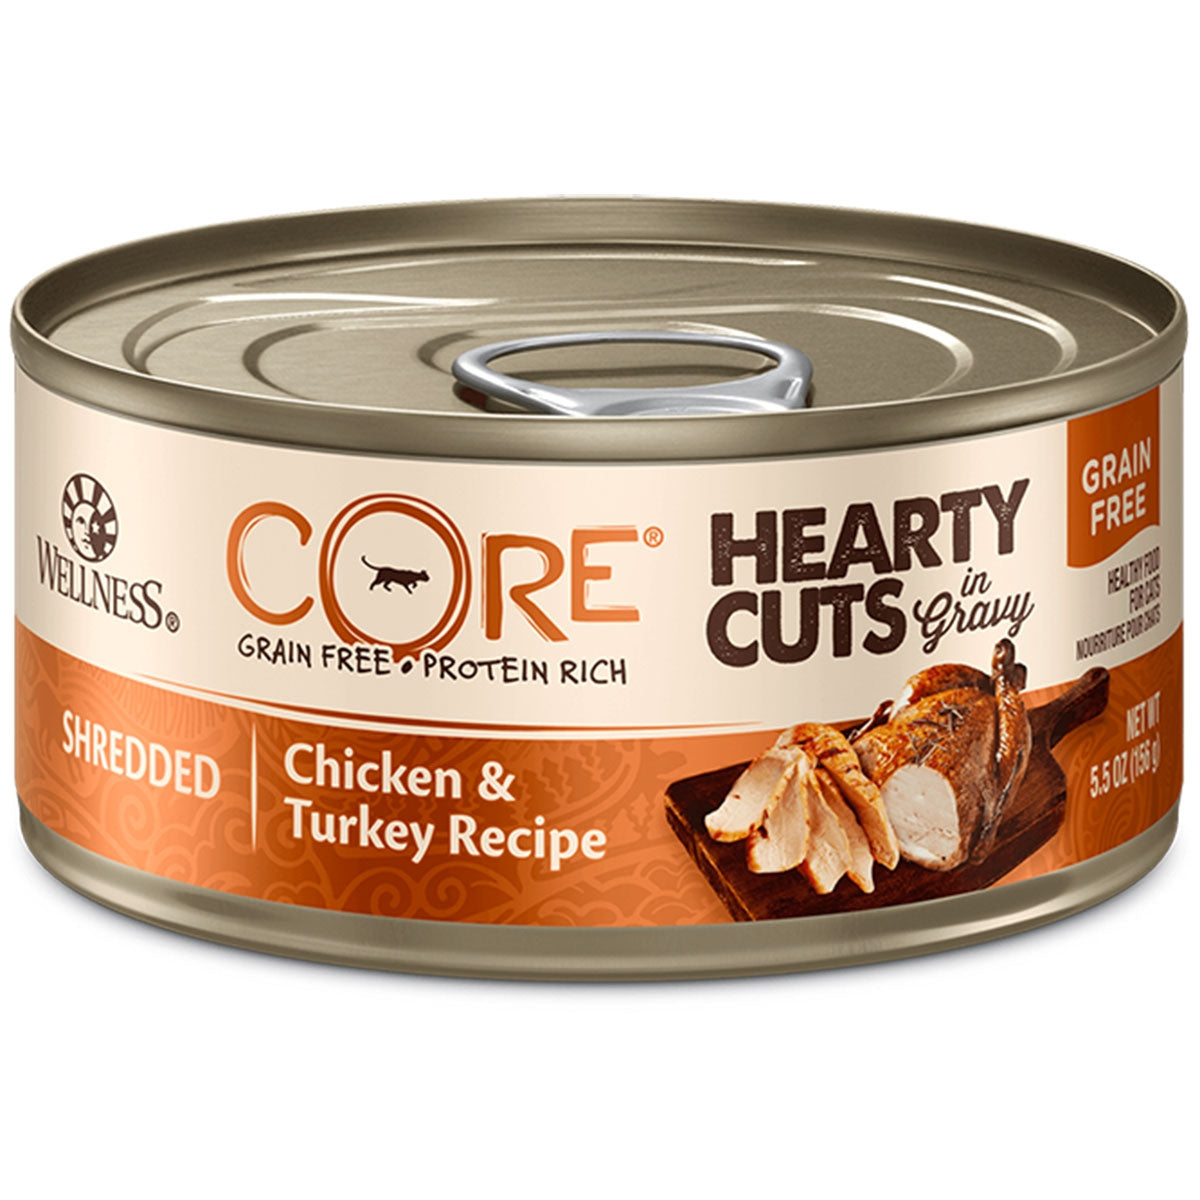 Wellness CORE Hearty Cuts for Cats - Grain Free Chicken & Turkey can 5.5oz